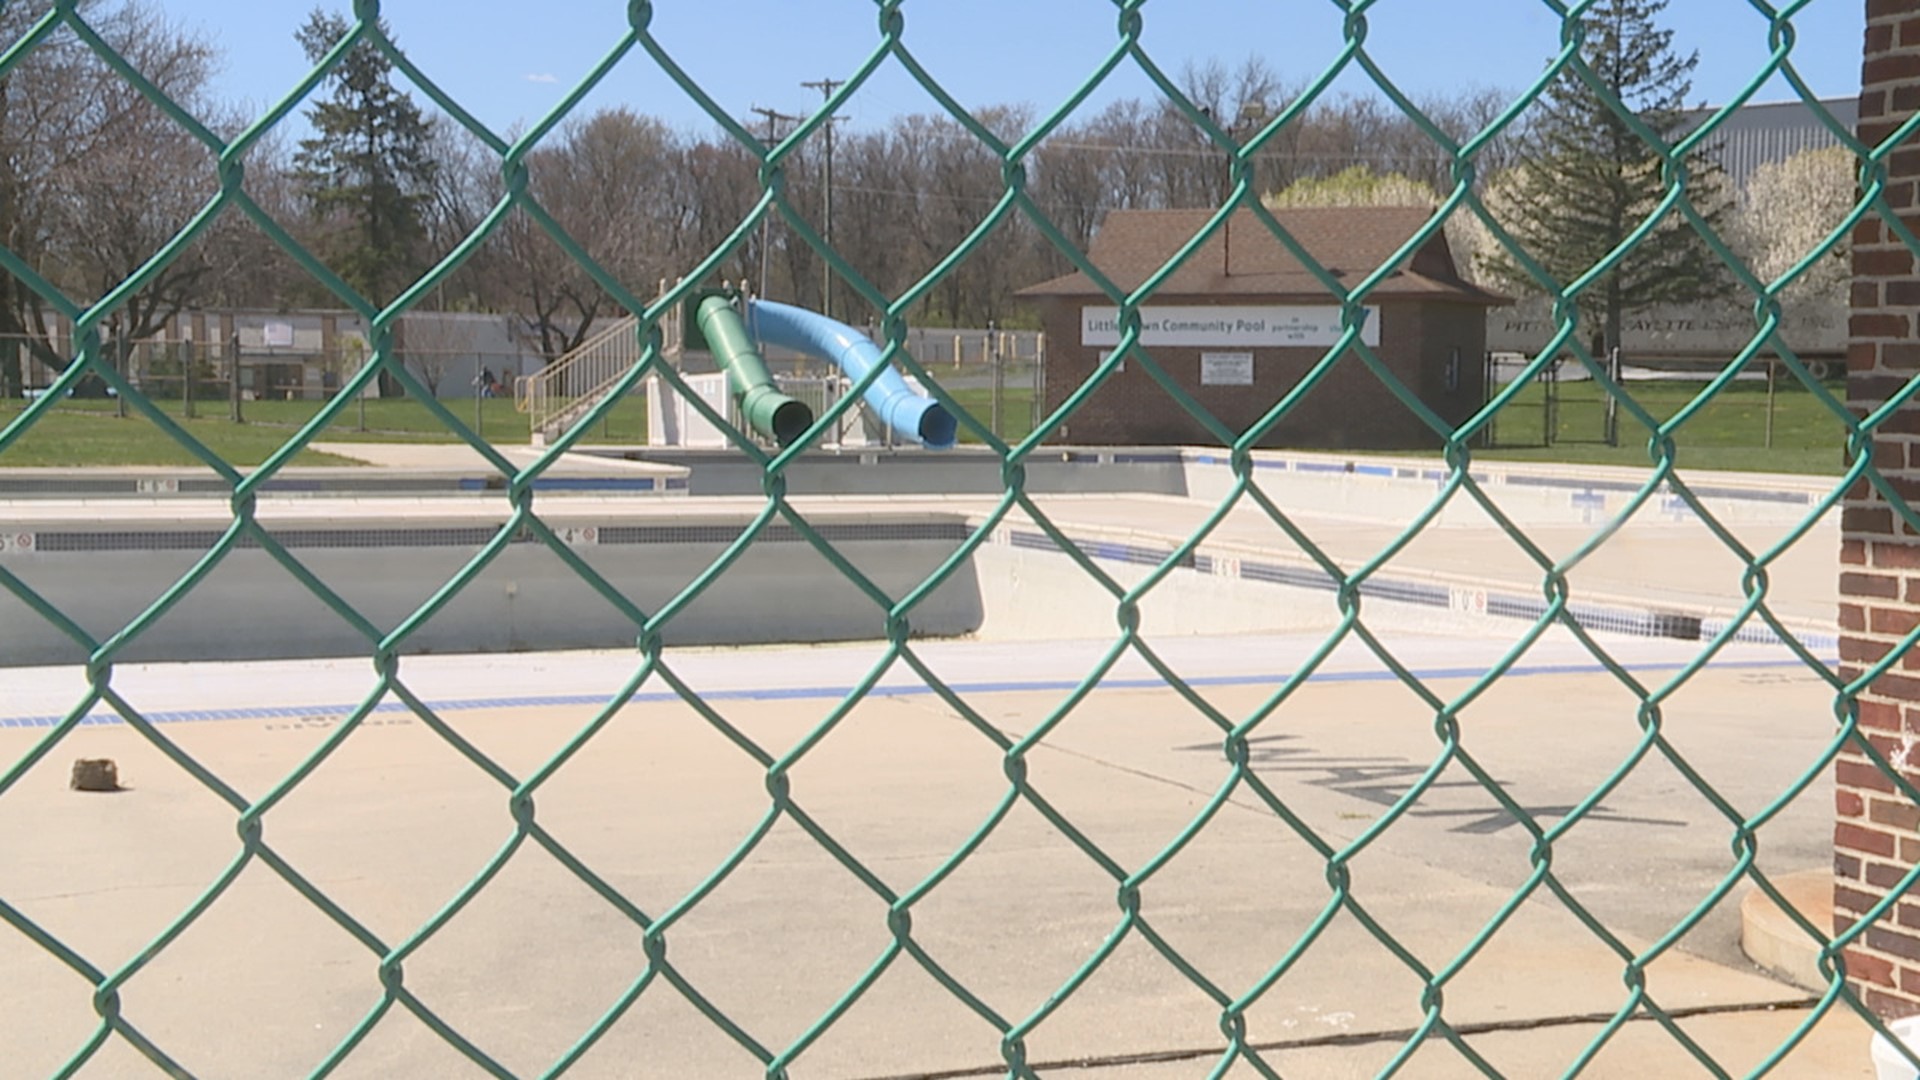 The Borough Council voted 4-2 to decommission the pool.